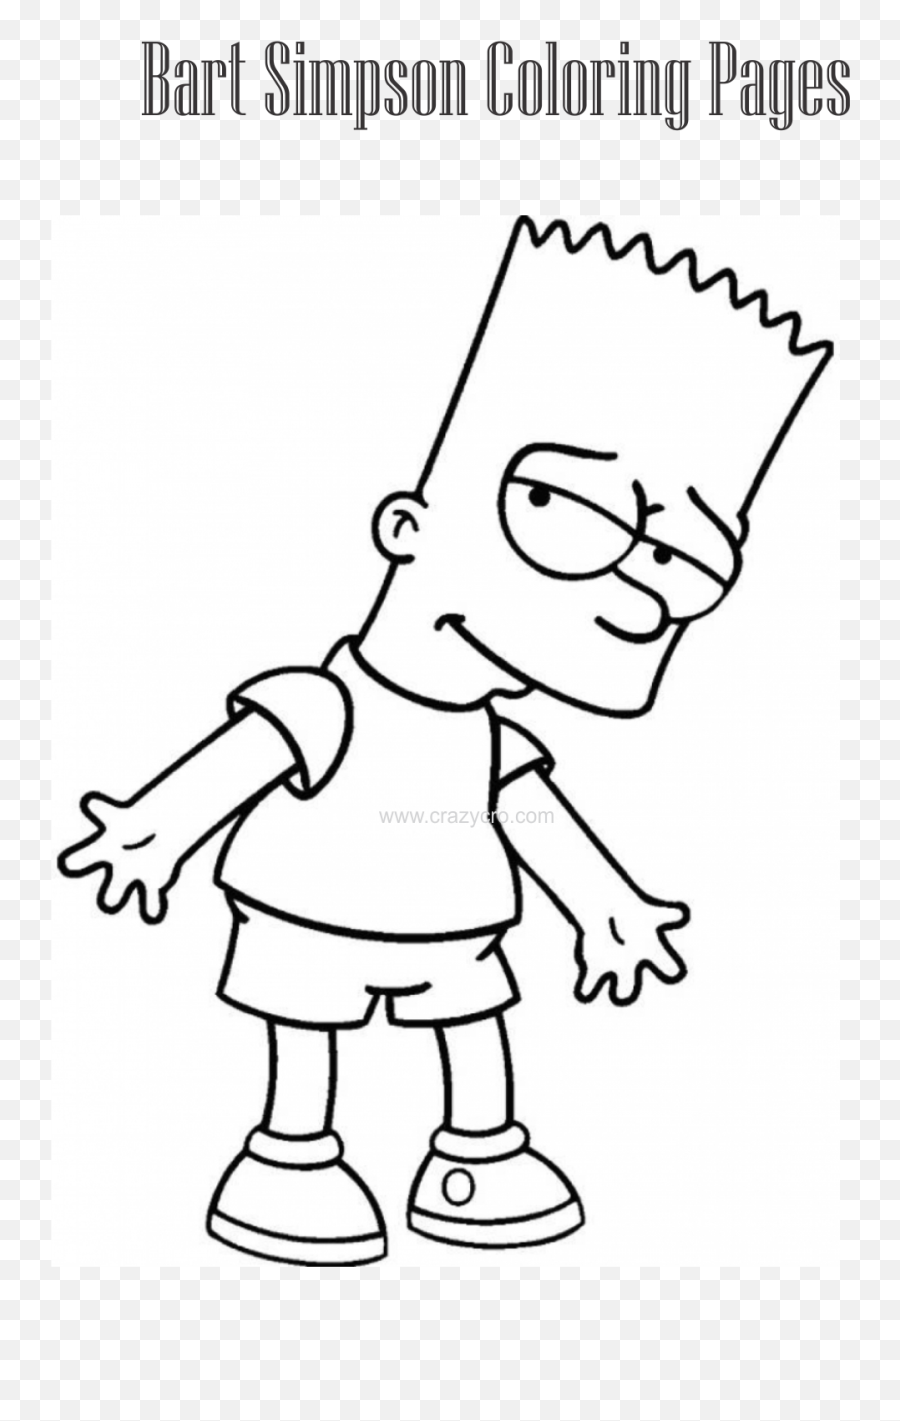 Bart Simpson Coloring Pages U2013 Free Page For Kids Png Transparent